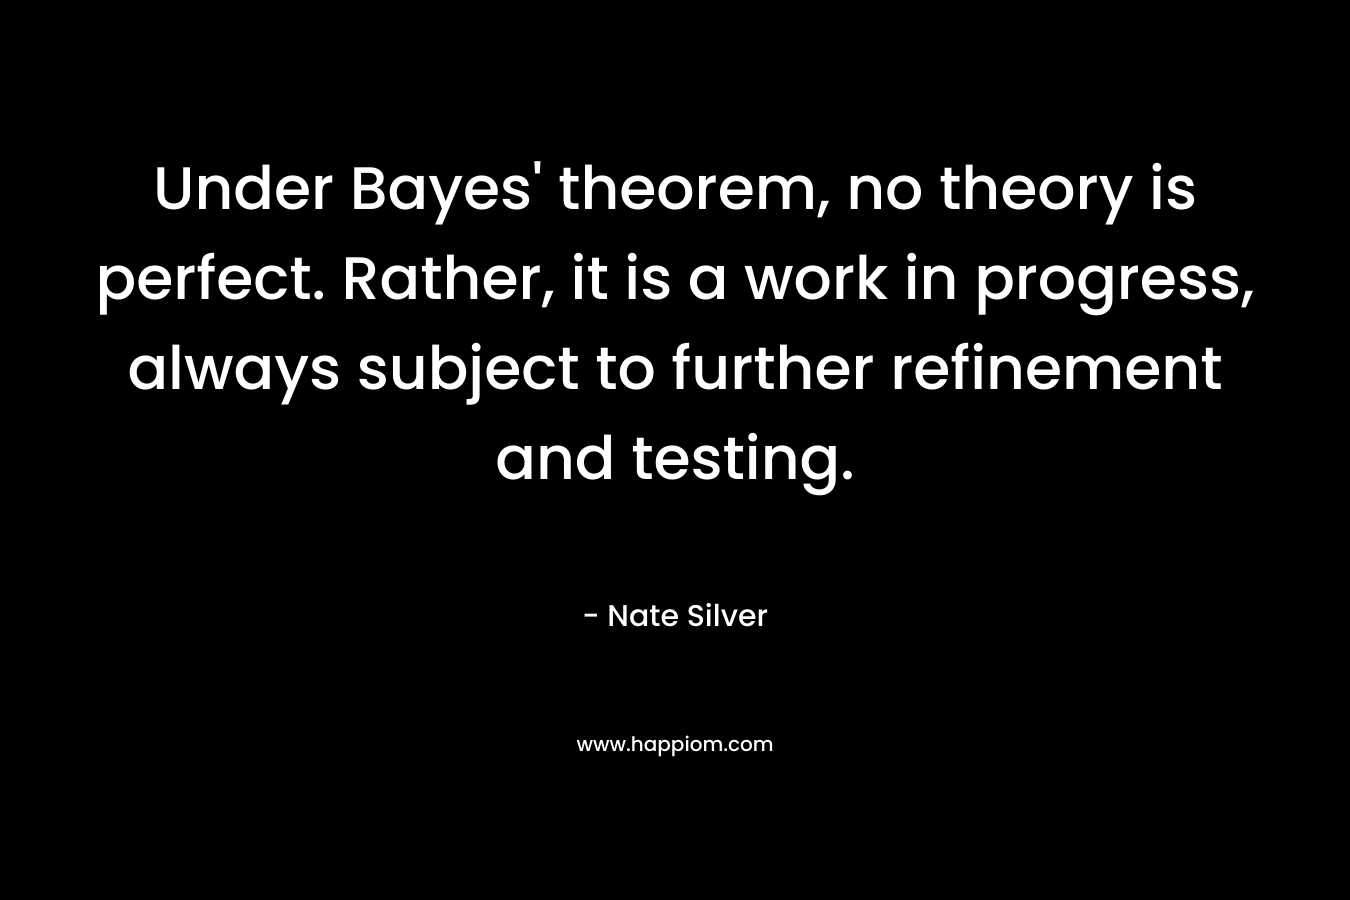 Under Bayes’ theorem, no theory is perfect. Rather, it is a work in progress, always subject to further refinement and testing. – Nate Silver